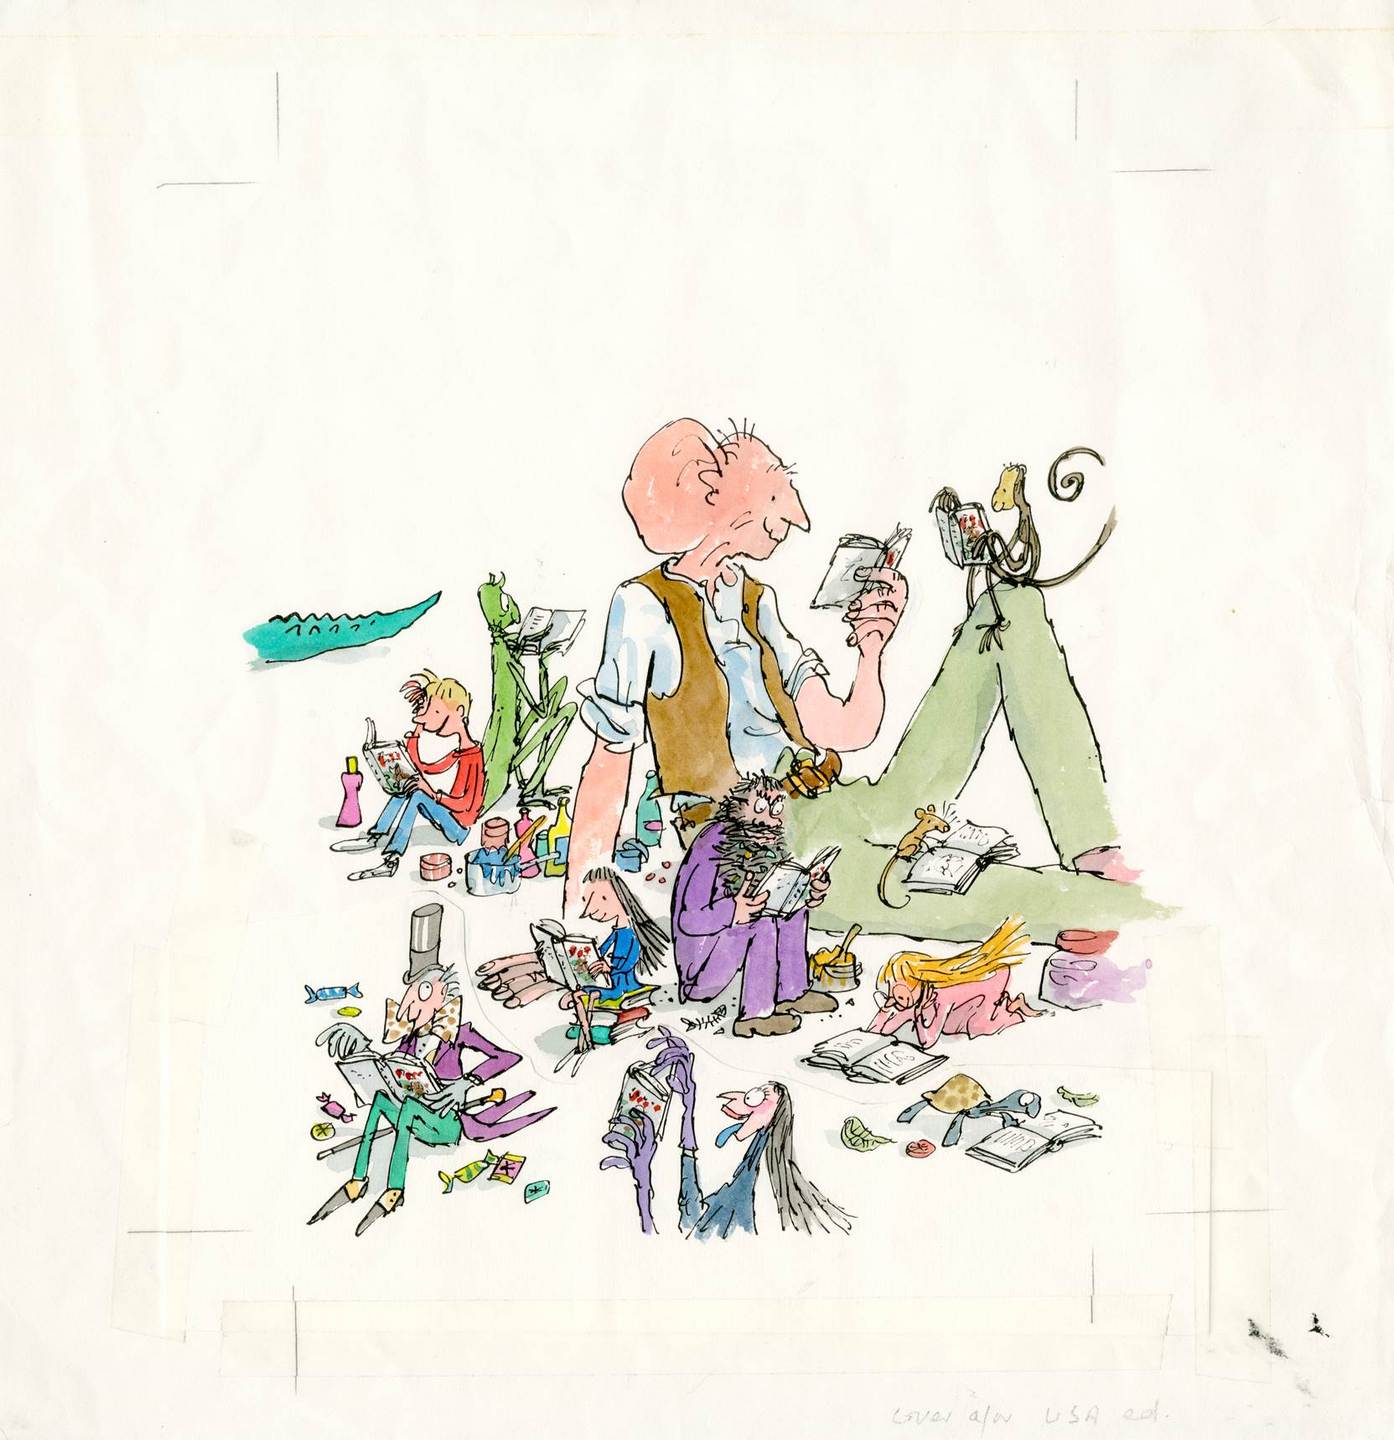 The illustrations that brought Roald Dahl #39 s books to life